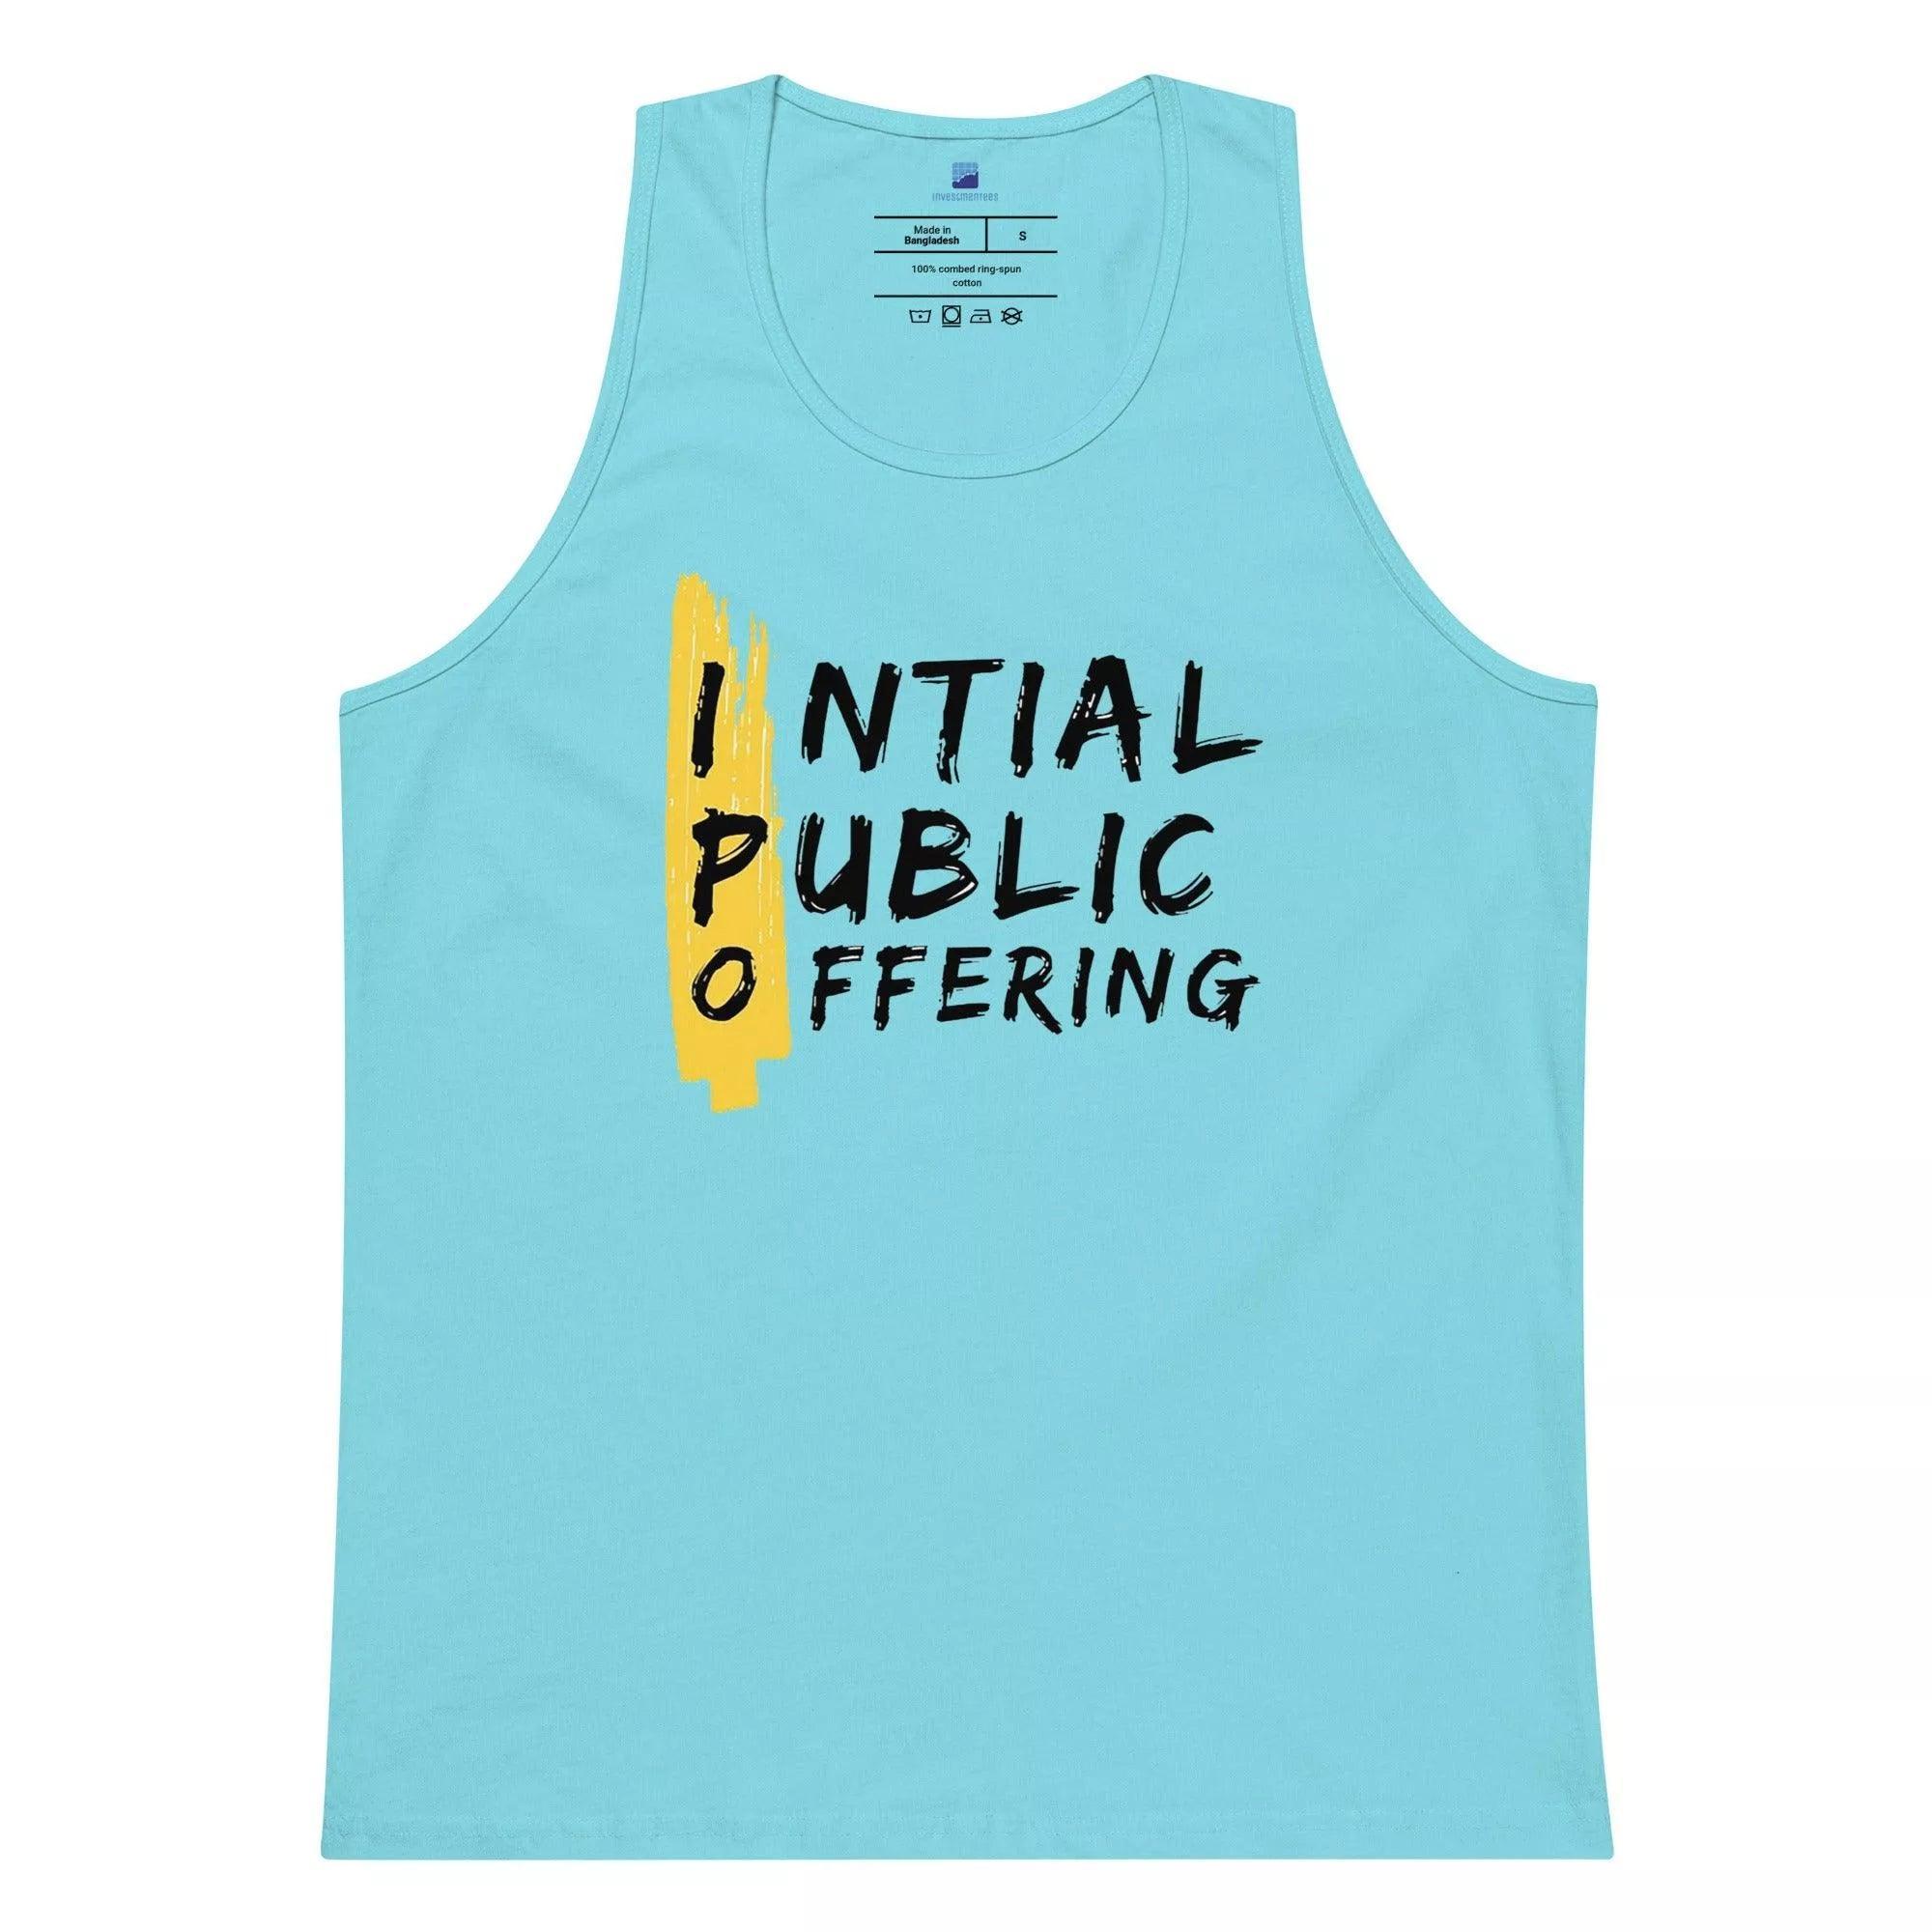 Initial Public Offering | IPO Tank Top - InvestmenTees